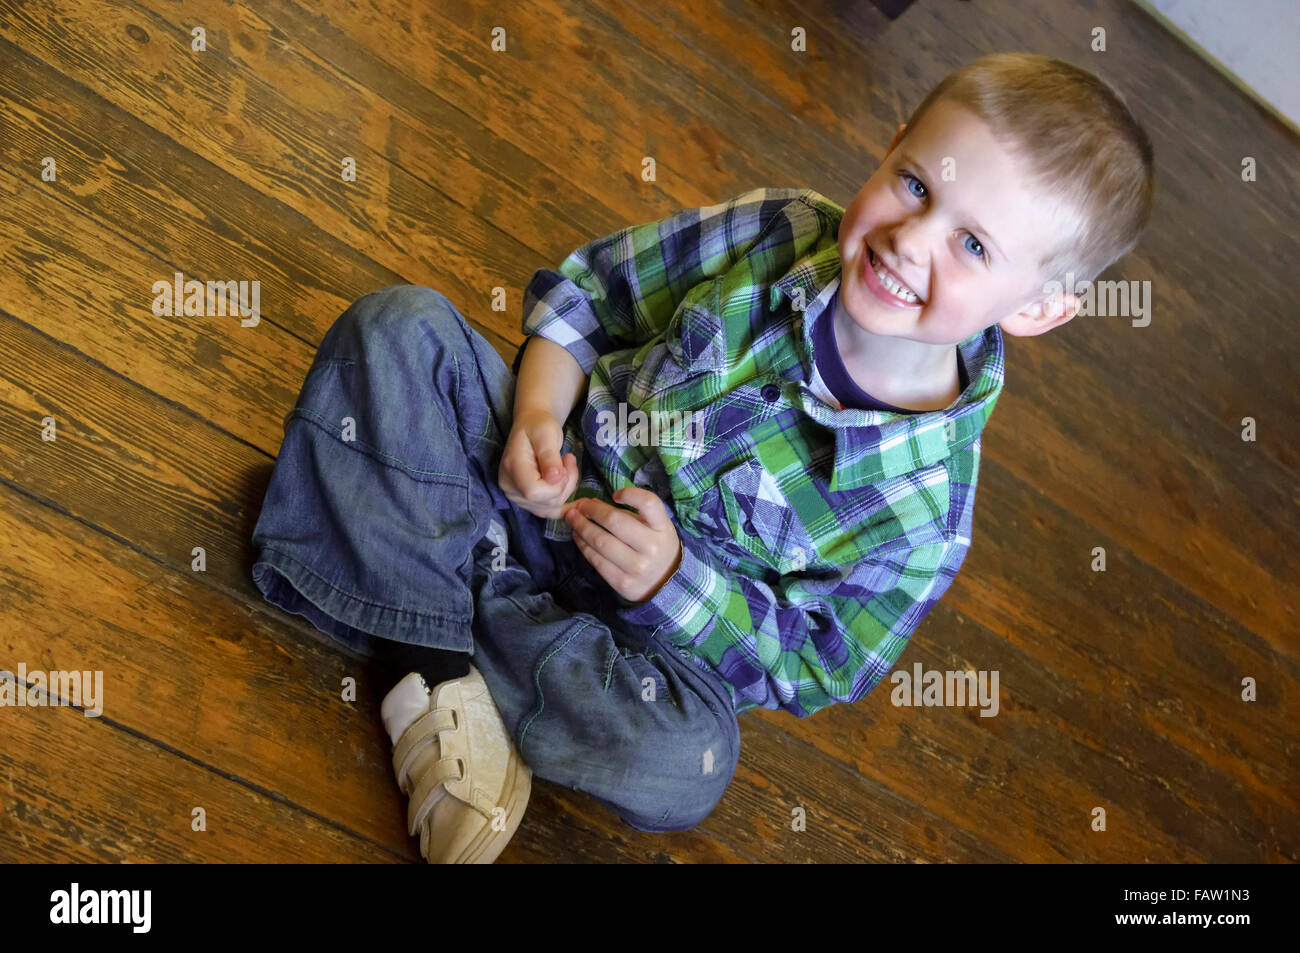 Smiling handsome young boy sitting on a wooden floor  Model Release: Yes.  Property Release: No. Stock Photo